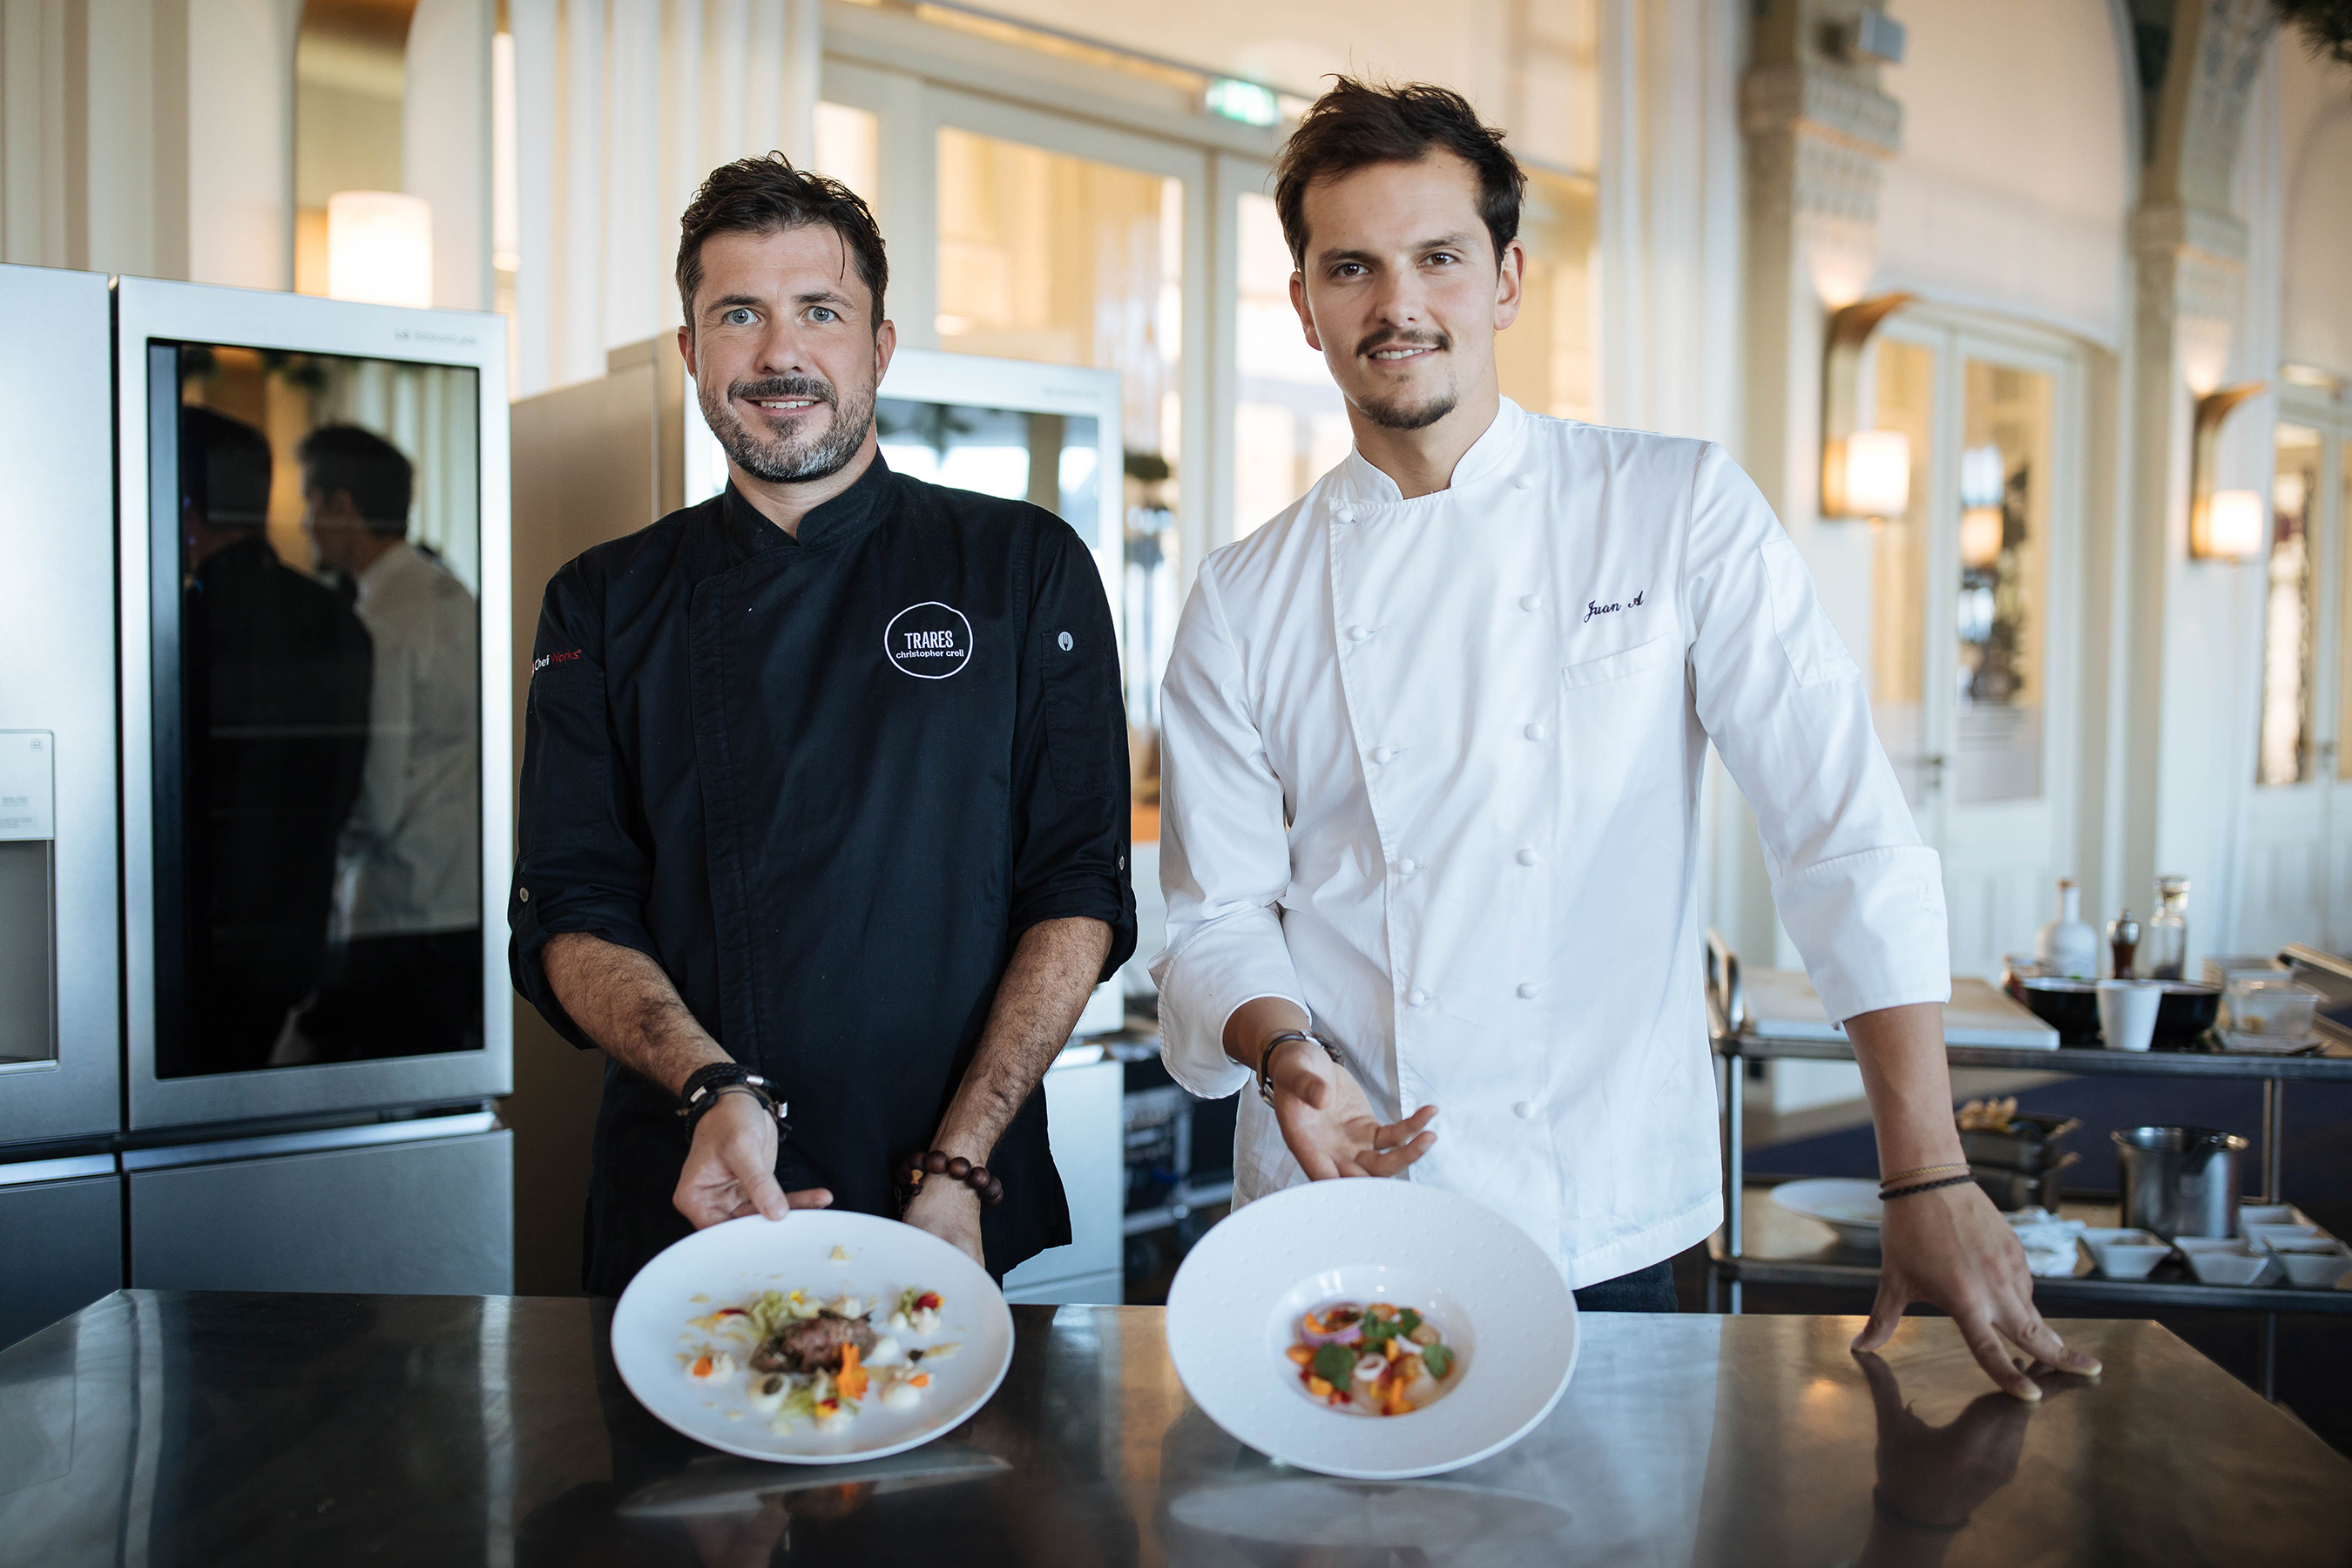 Chefs Christopher Crell and Juan Arbelaez with their own signature dishes Lewis Joly